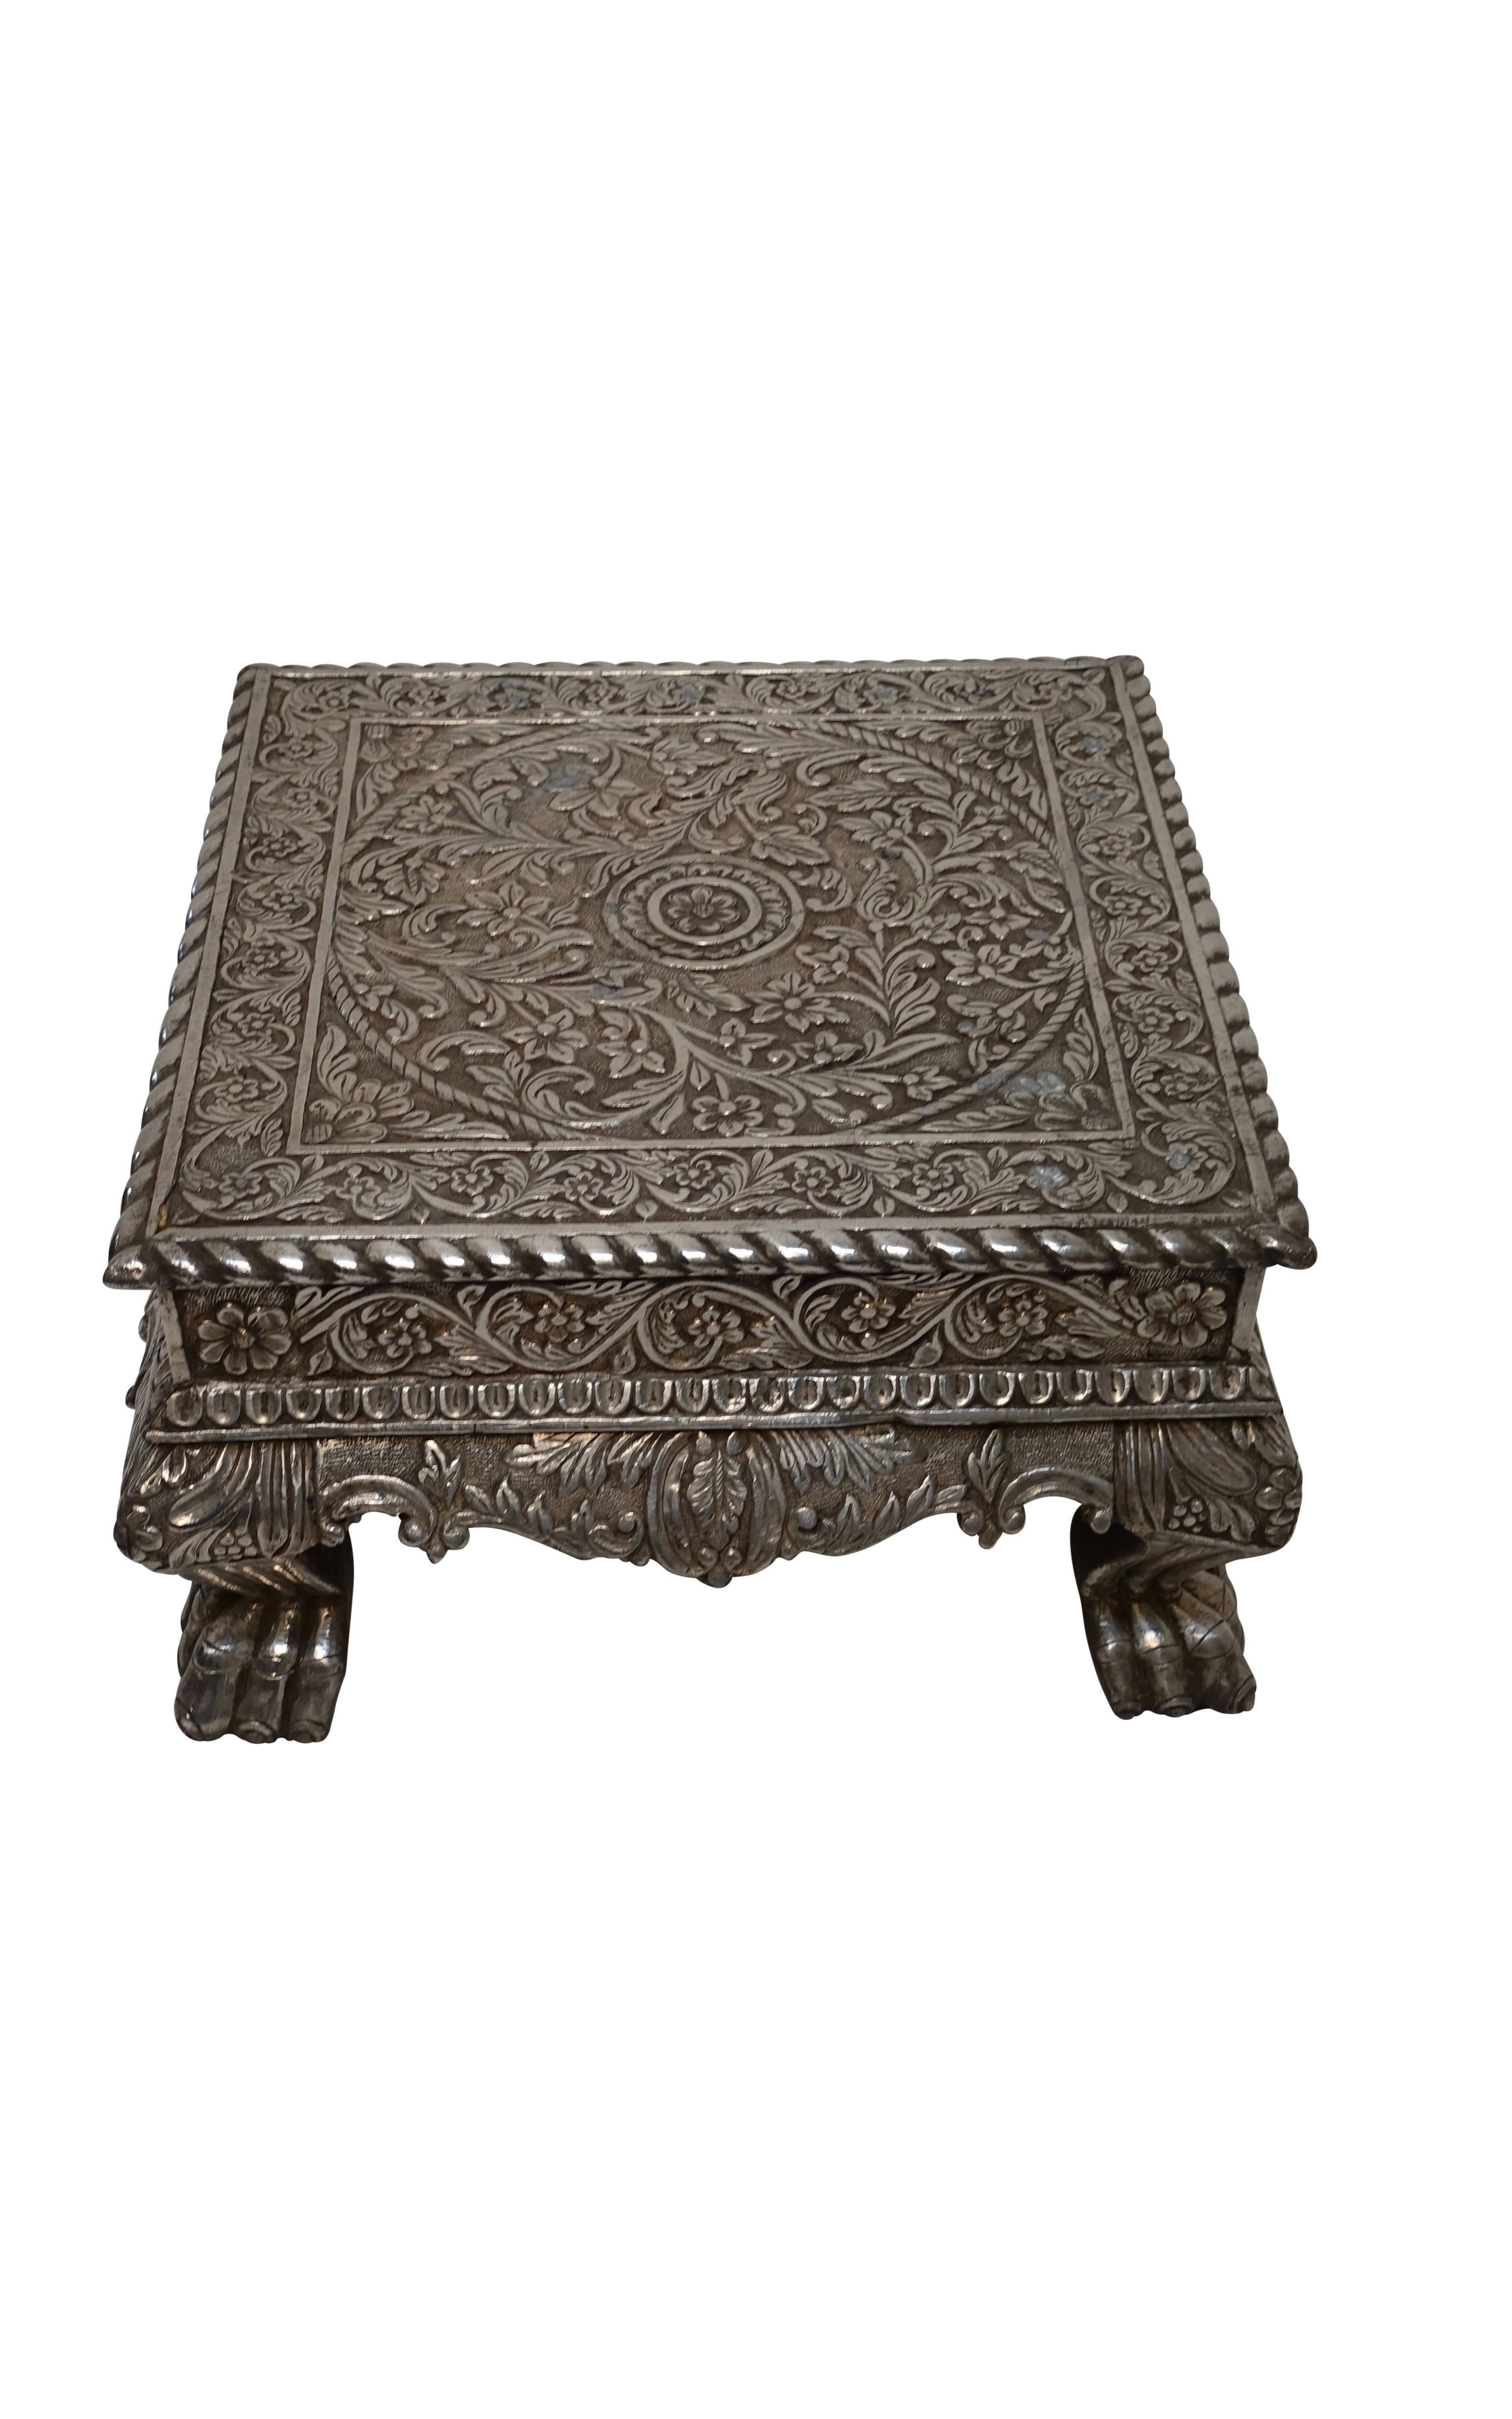 20th Century Anglo-Indian Silver Clad Bajot Ceremonial Low Table, India, circa 1925